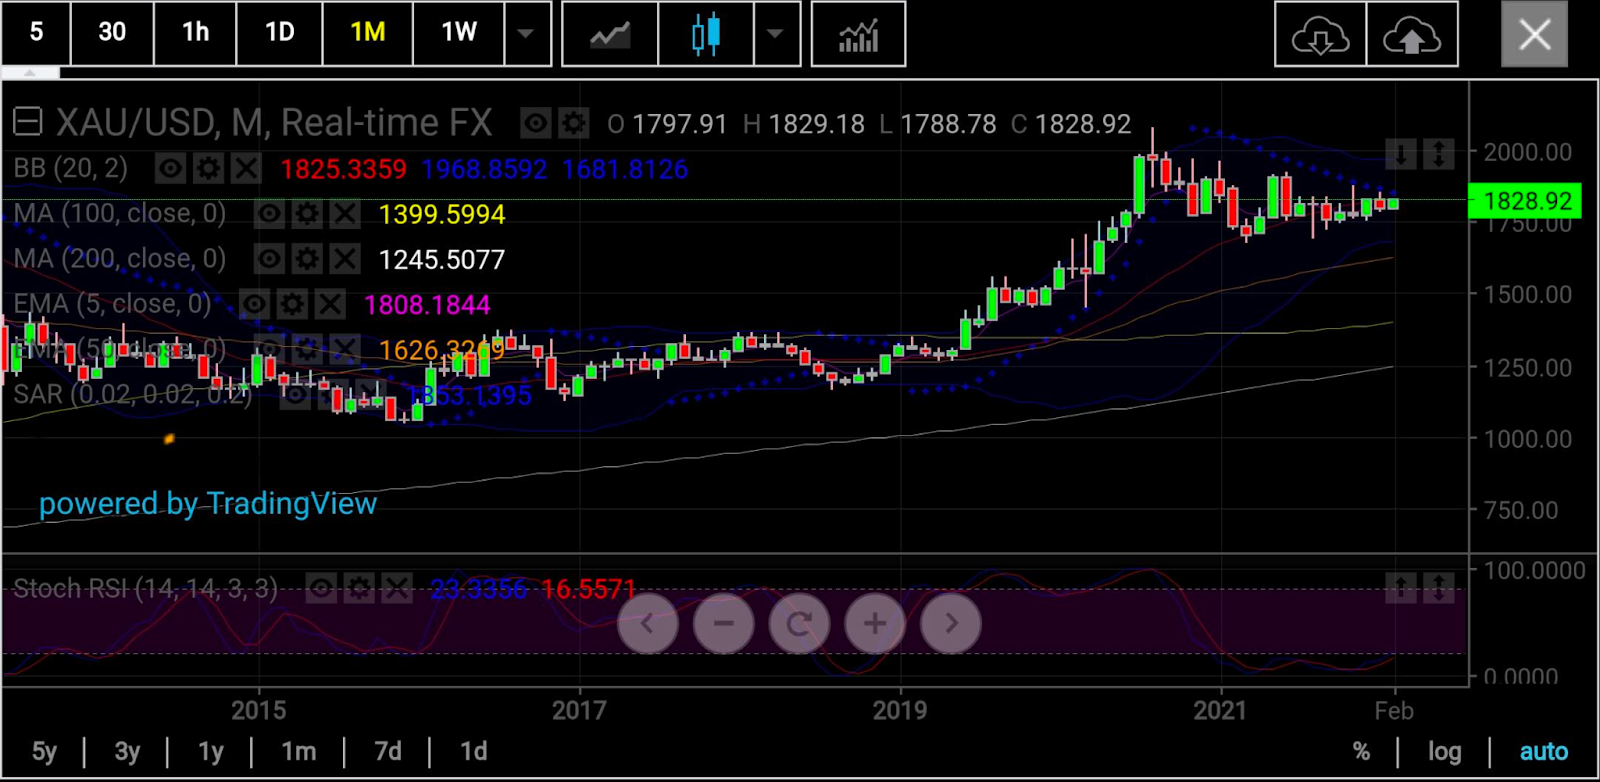 Gold Monthly